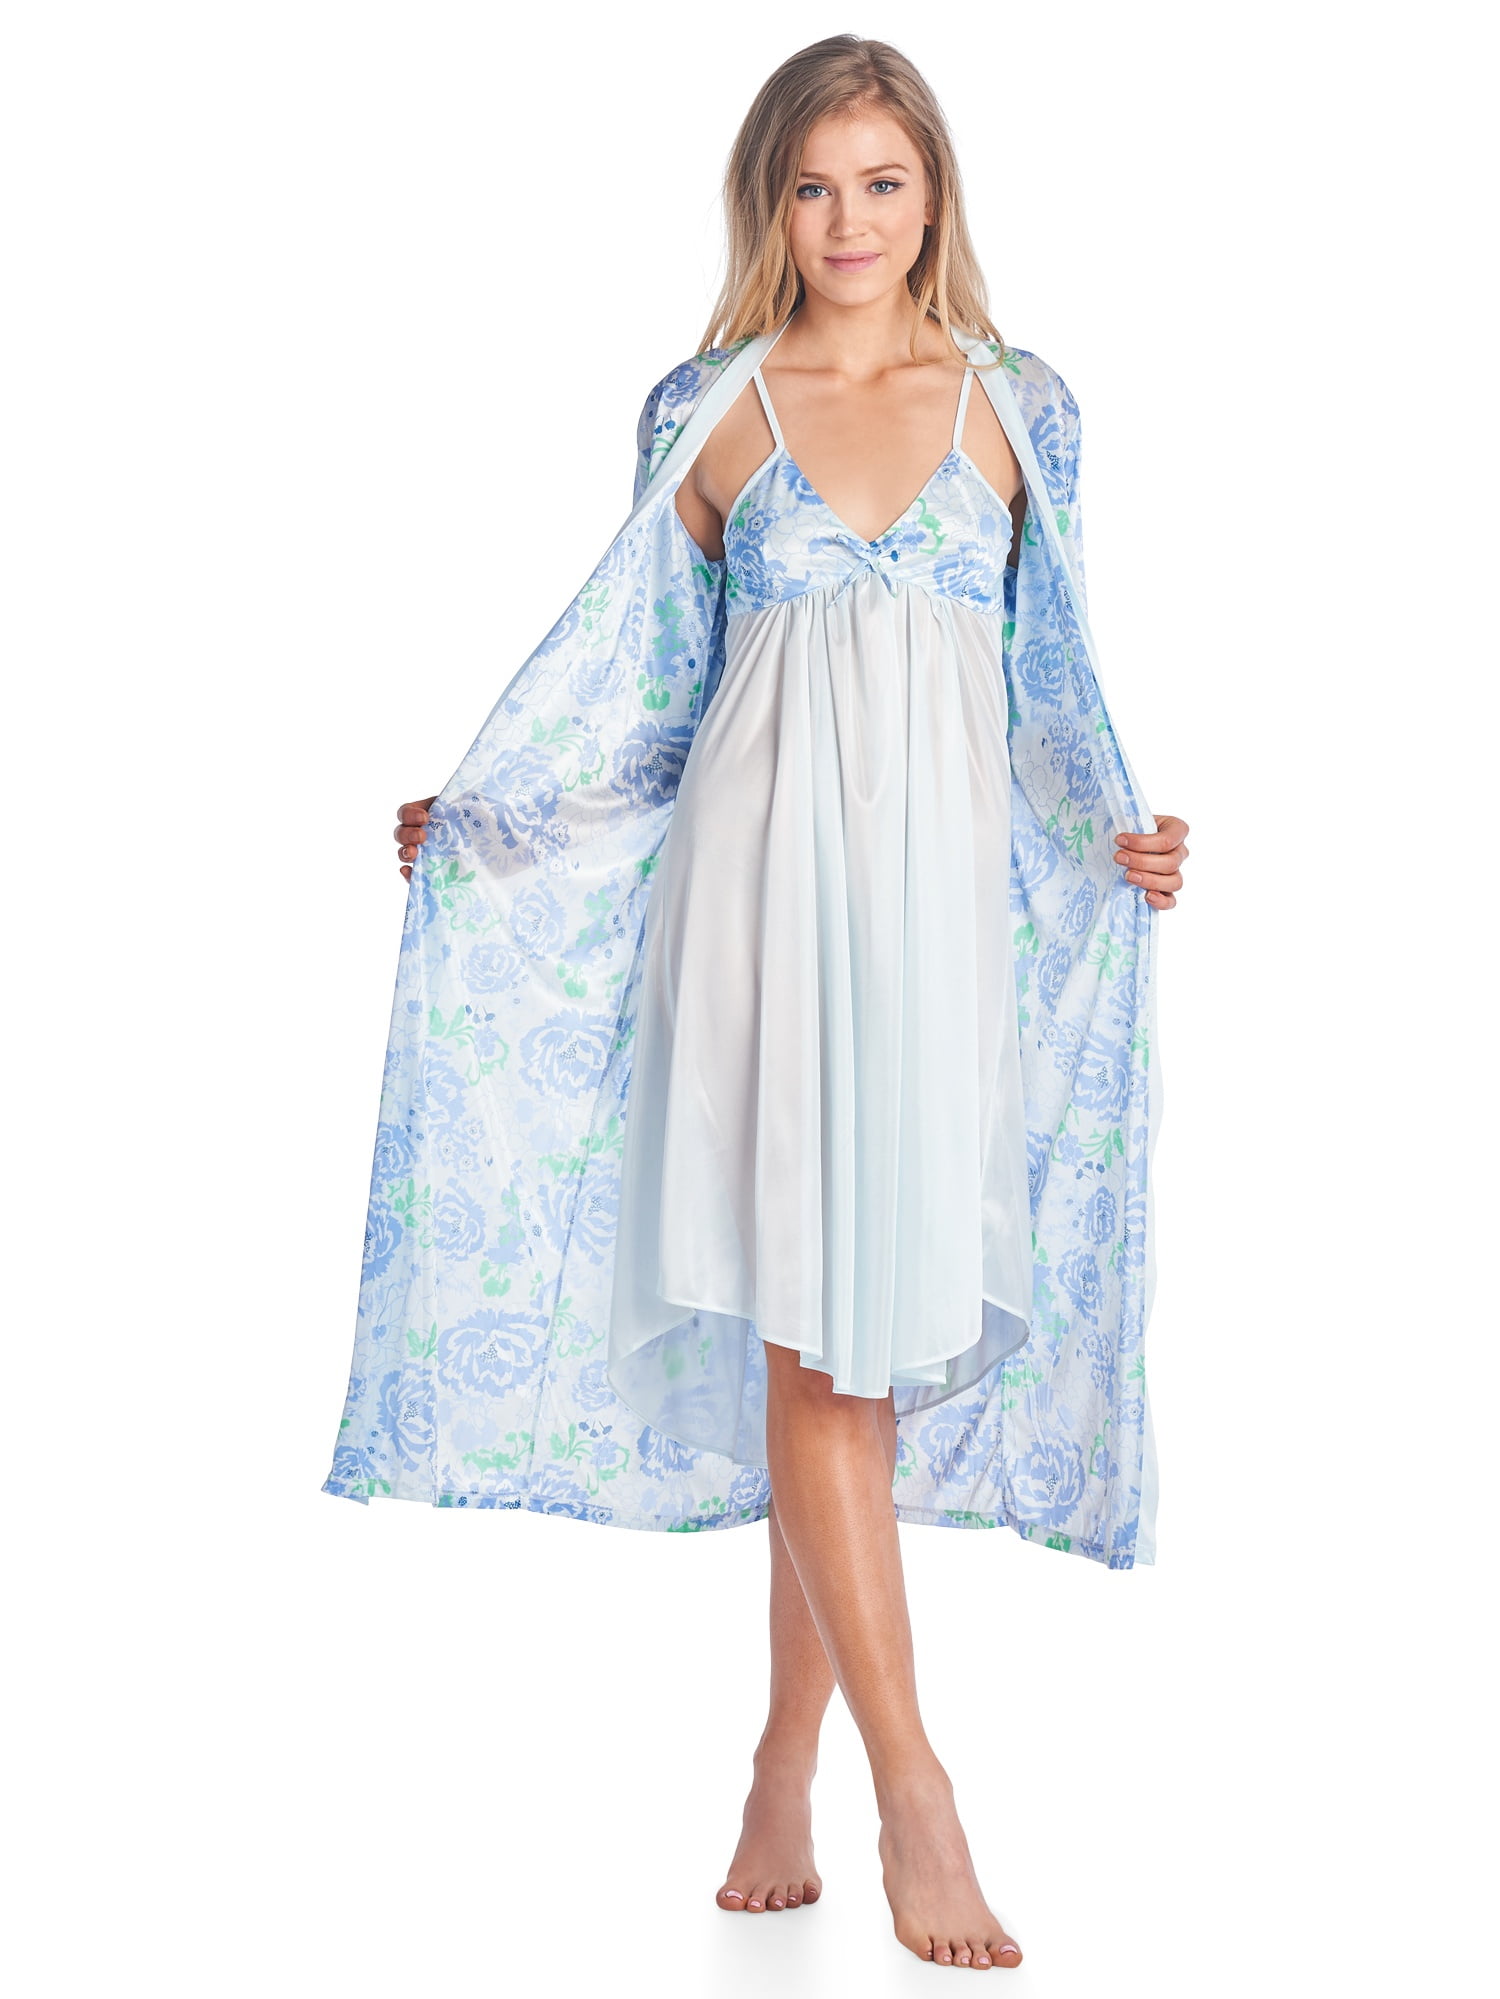 Satin 2 Piece Robe and Nightgown Set ...